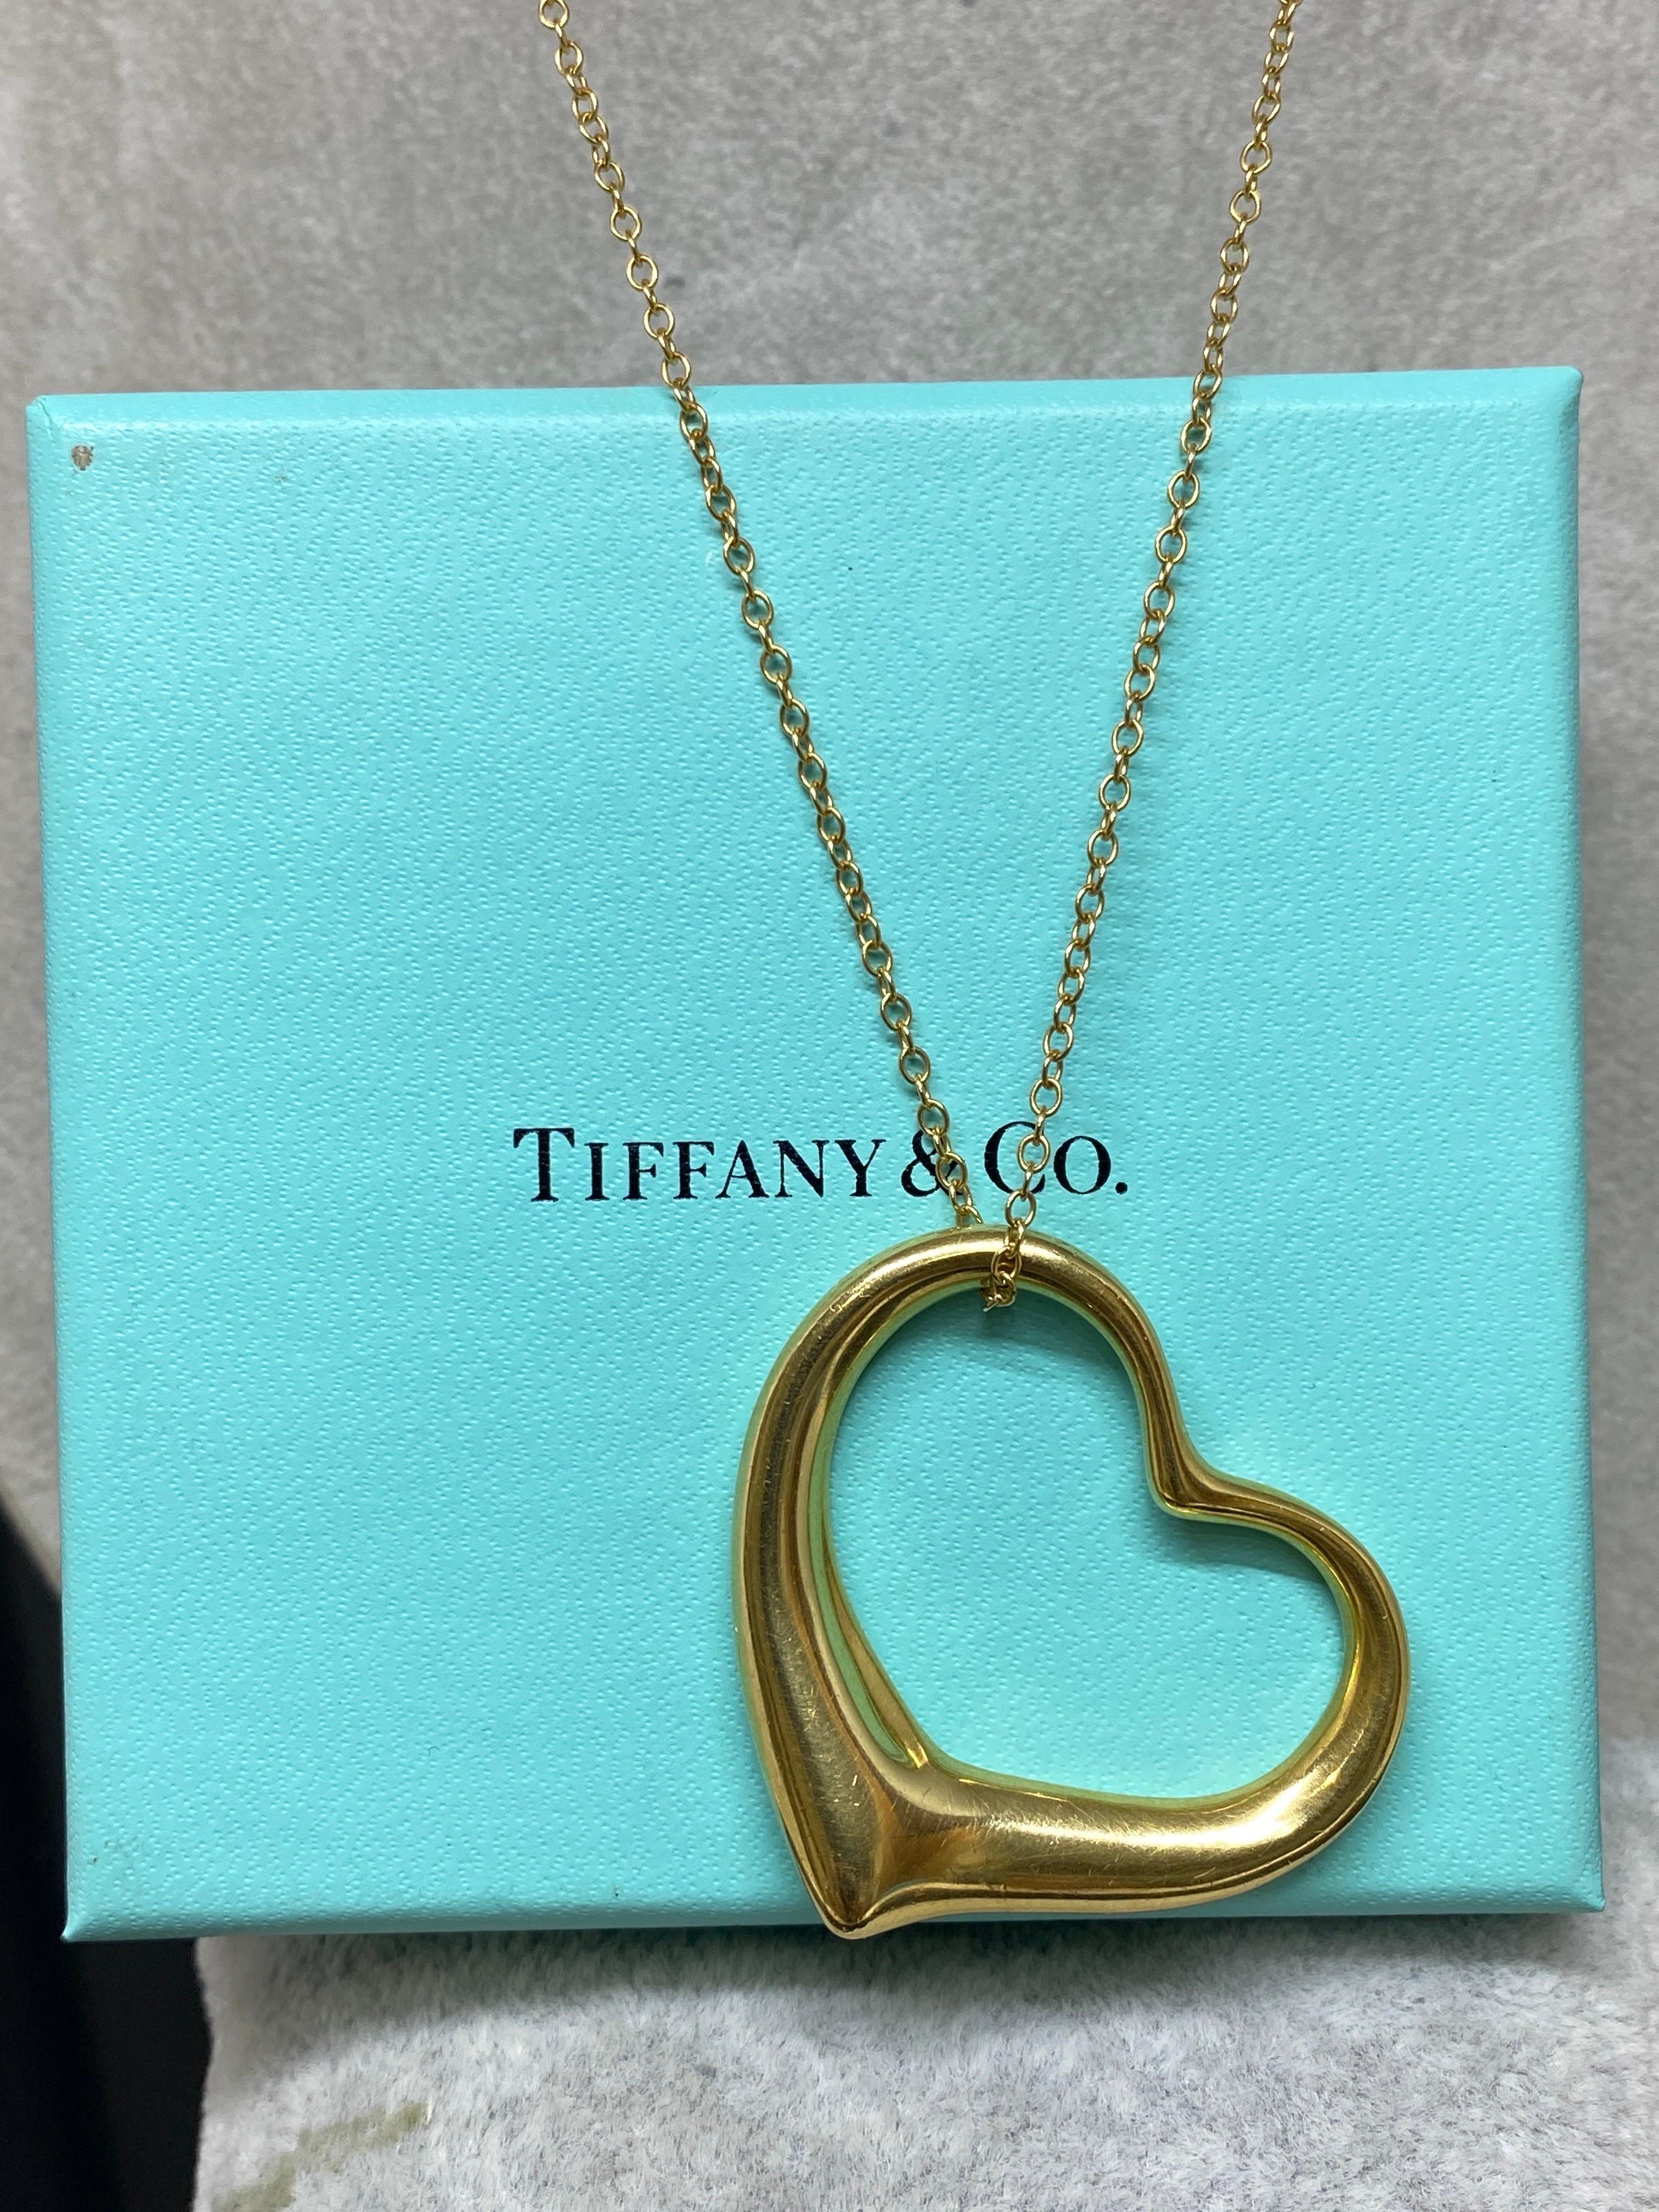 Up for your consideration is this iconic pendant necklace by Elsa Peretti for Tiffany & Co.

The simple, classic shape of Elsa Peretti Open Heart designs celebrates the spirit of love. This elegant creation is one of her most celebrated icons.